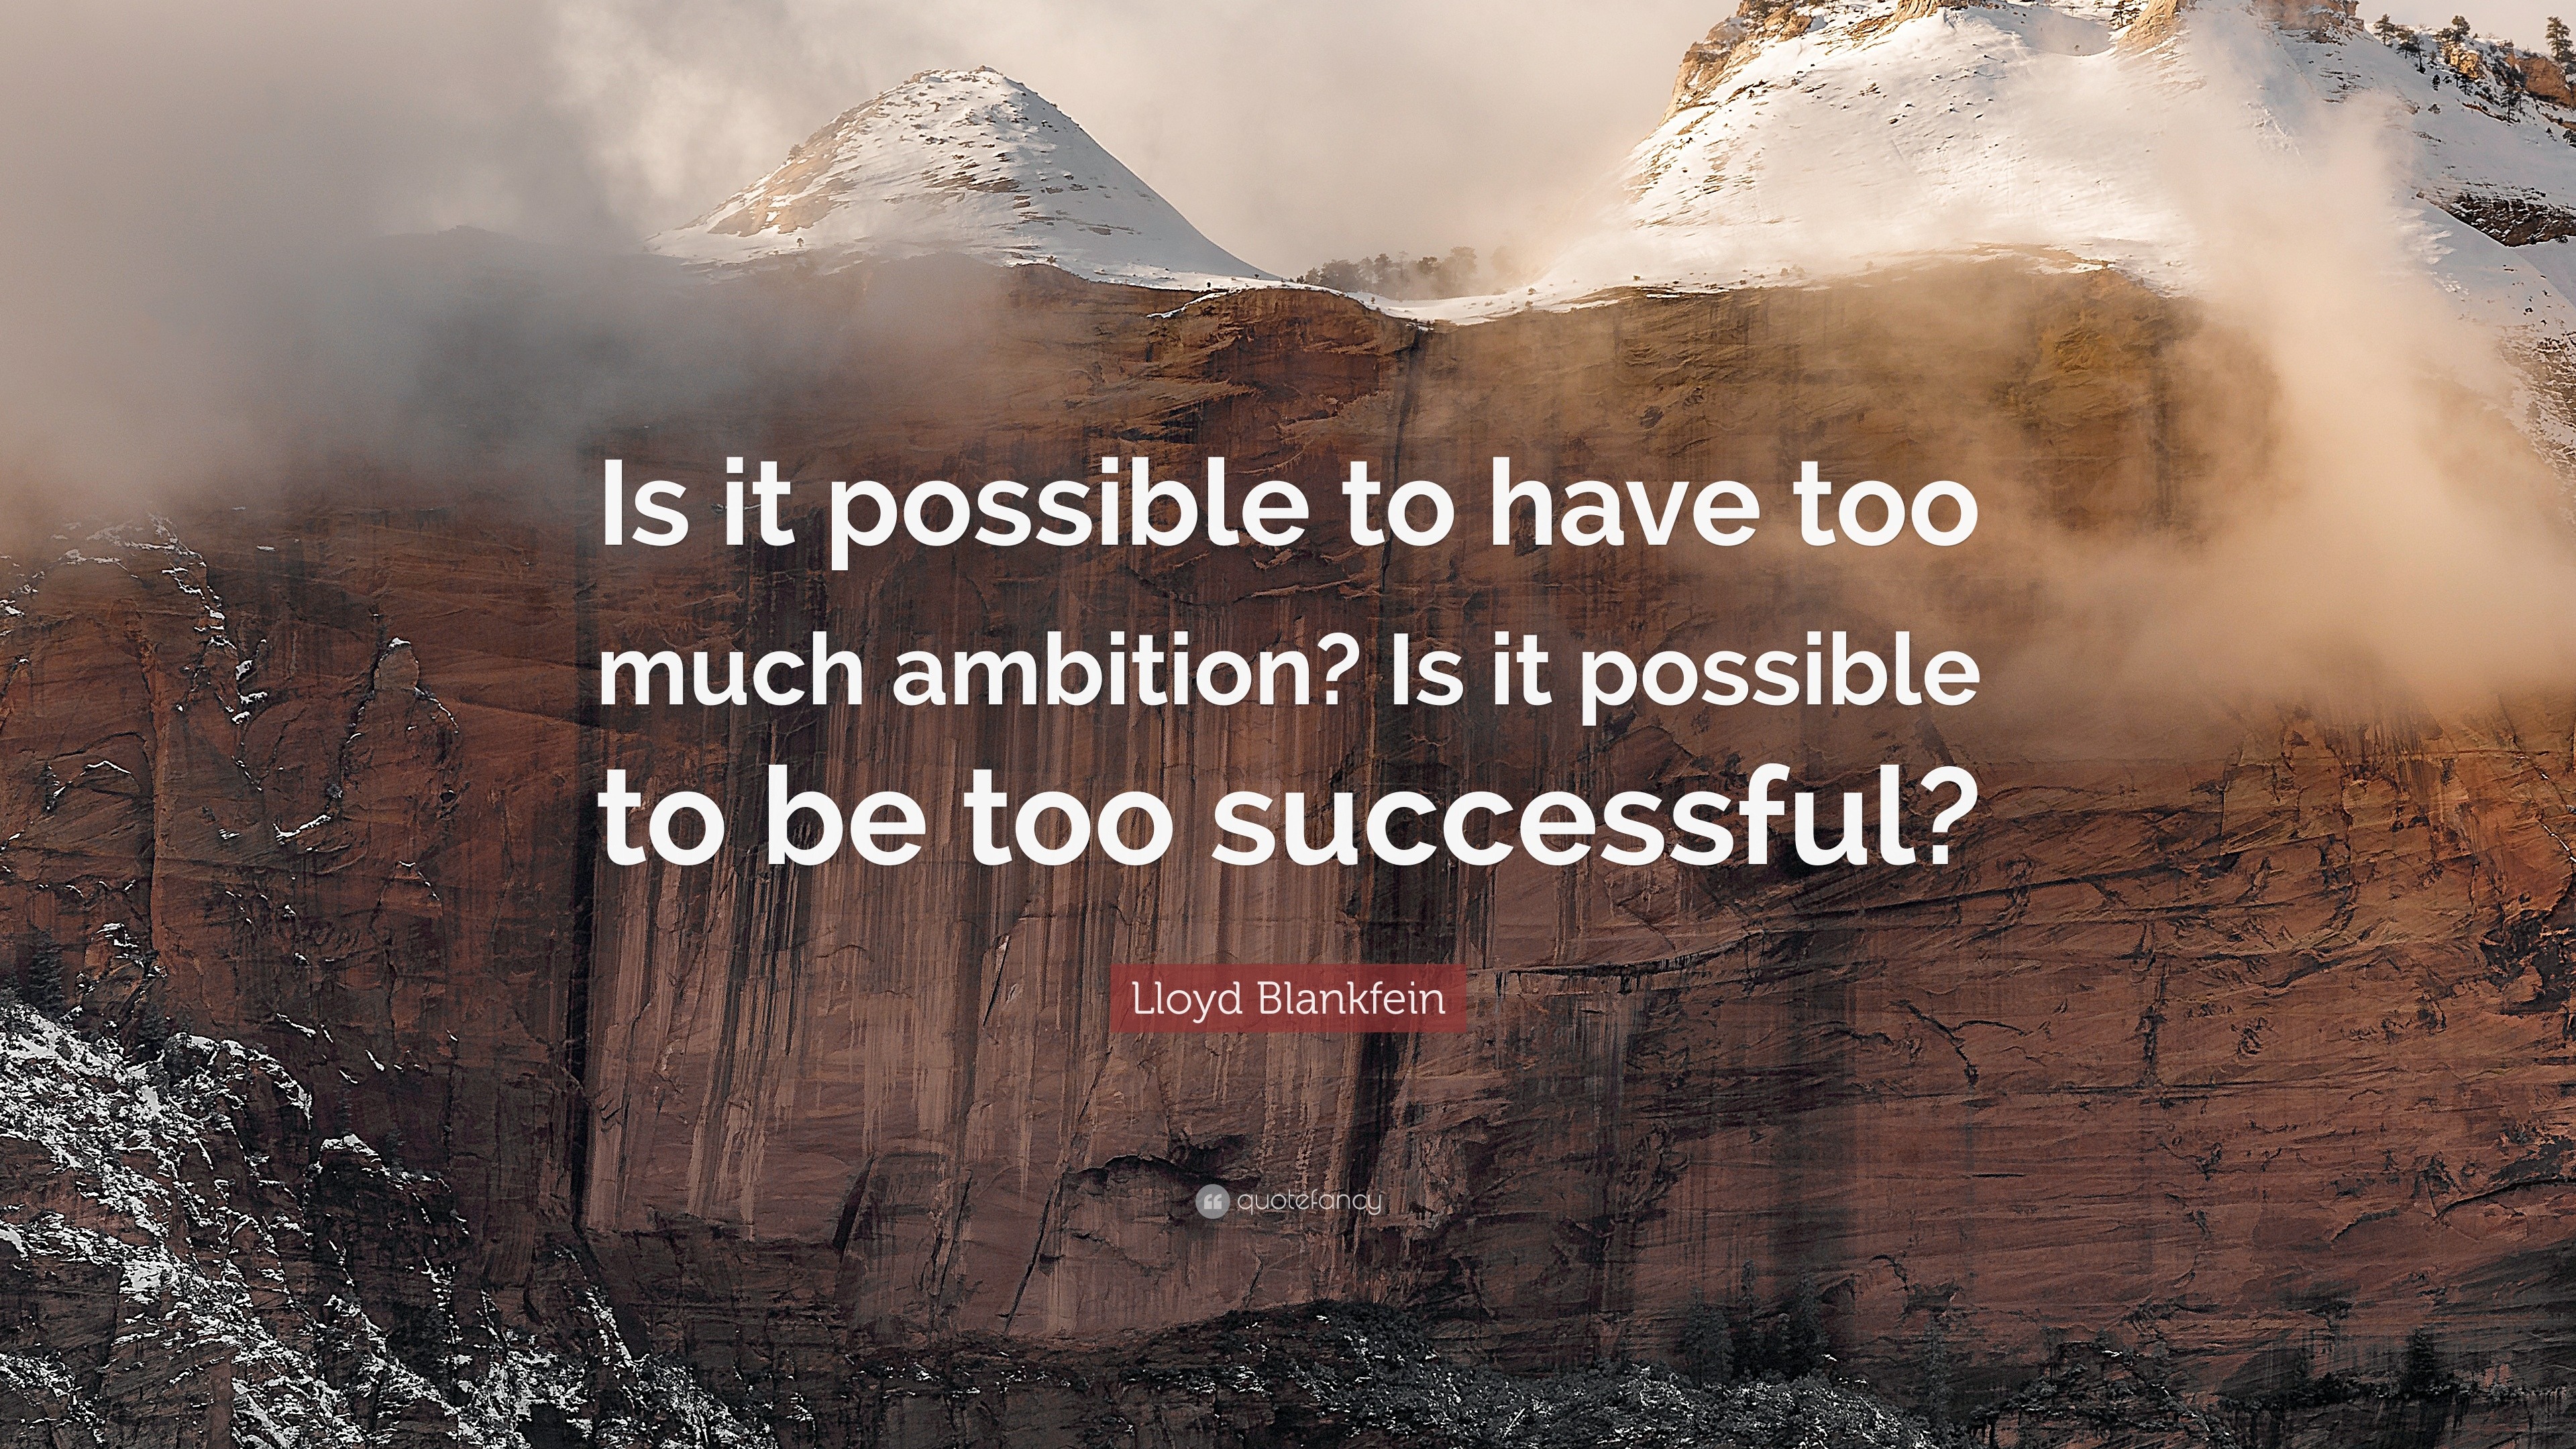 Lloyd Blankfein Quote: “Is it possible to have too much ambition? Is it ...